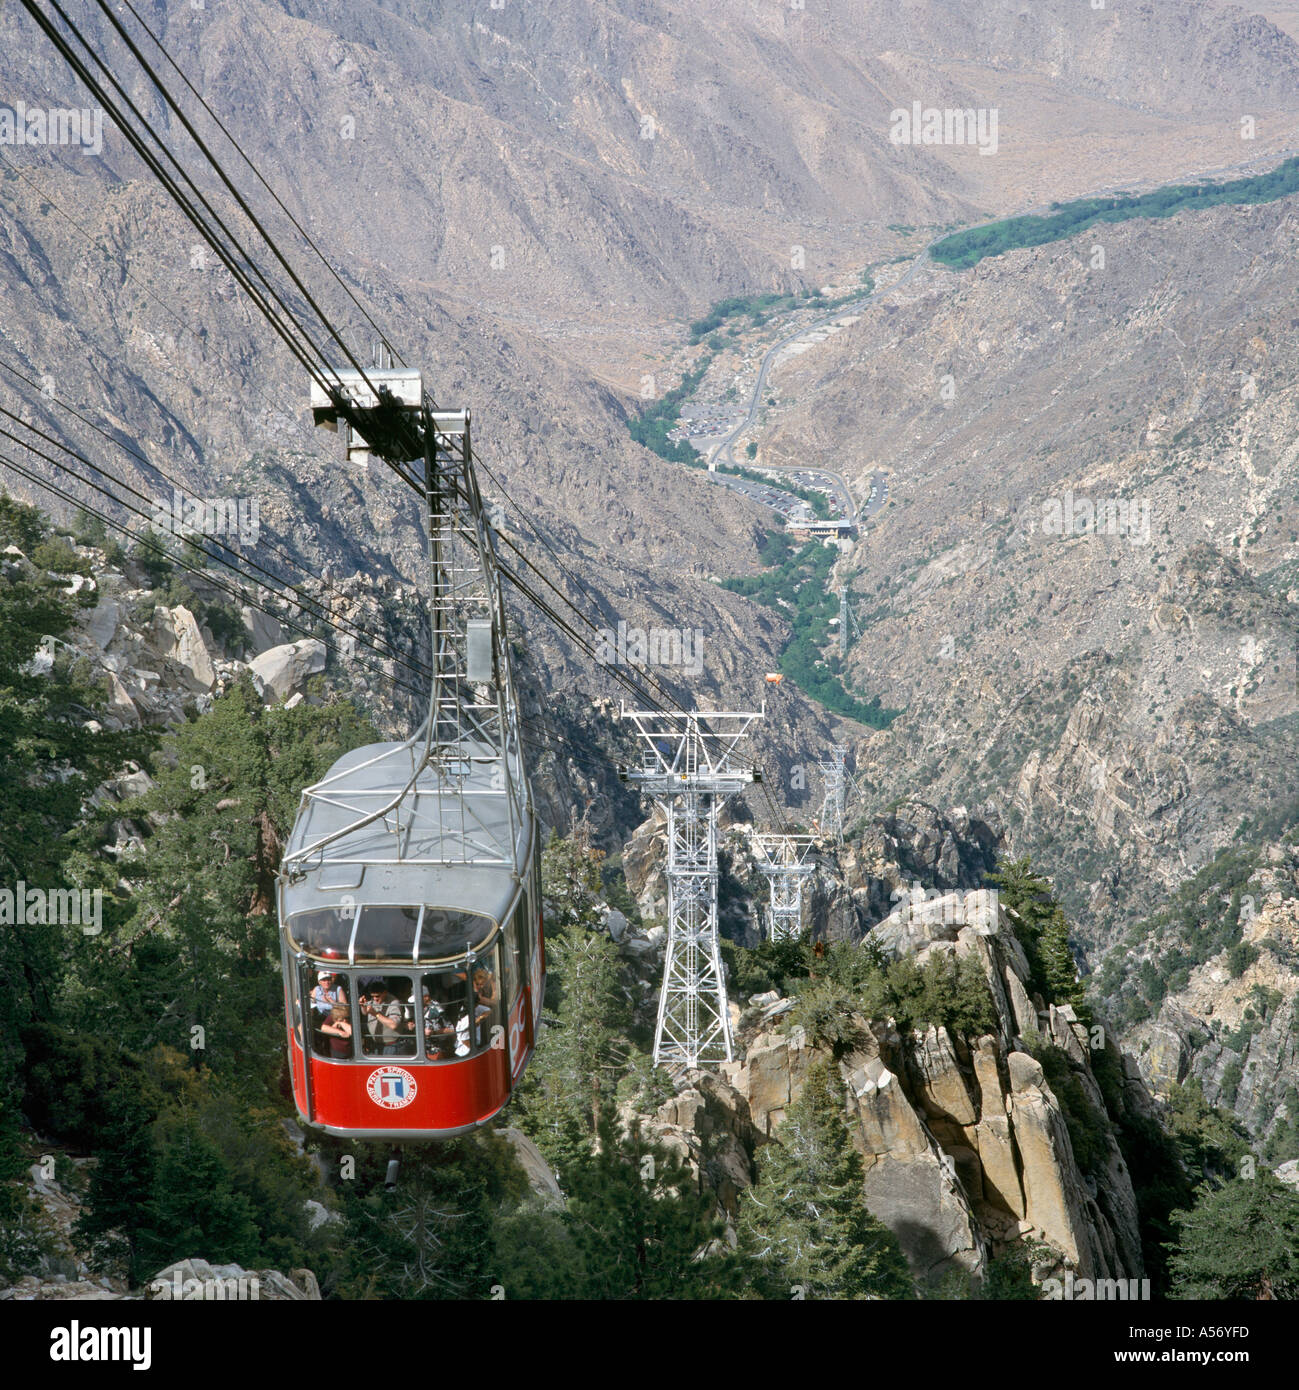 The old Aerial Tramway, Palm Springs, California, USA Stock Photo